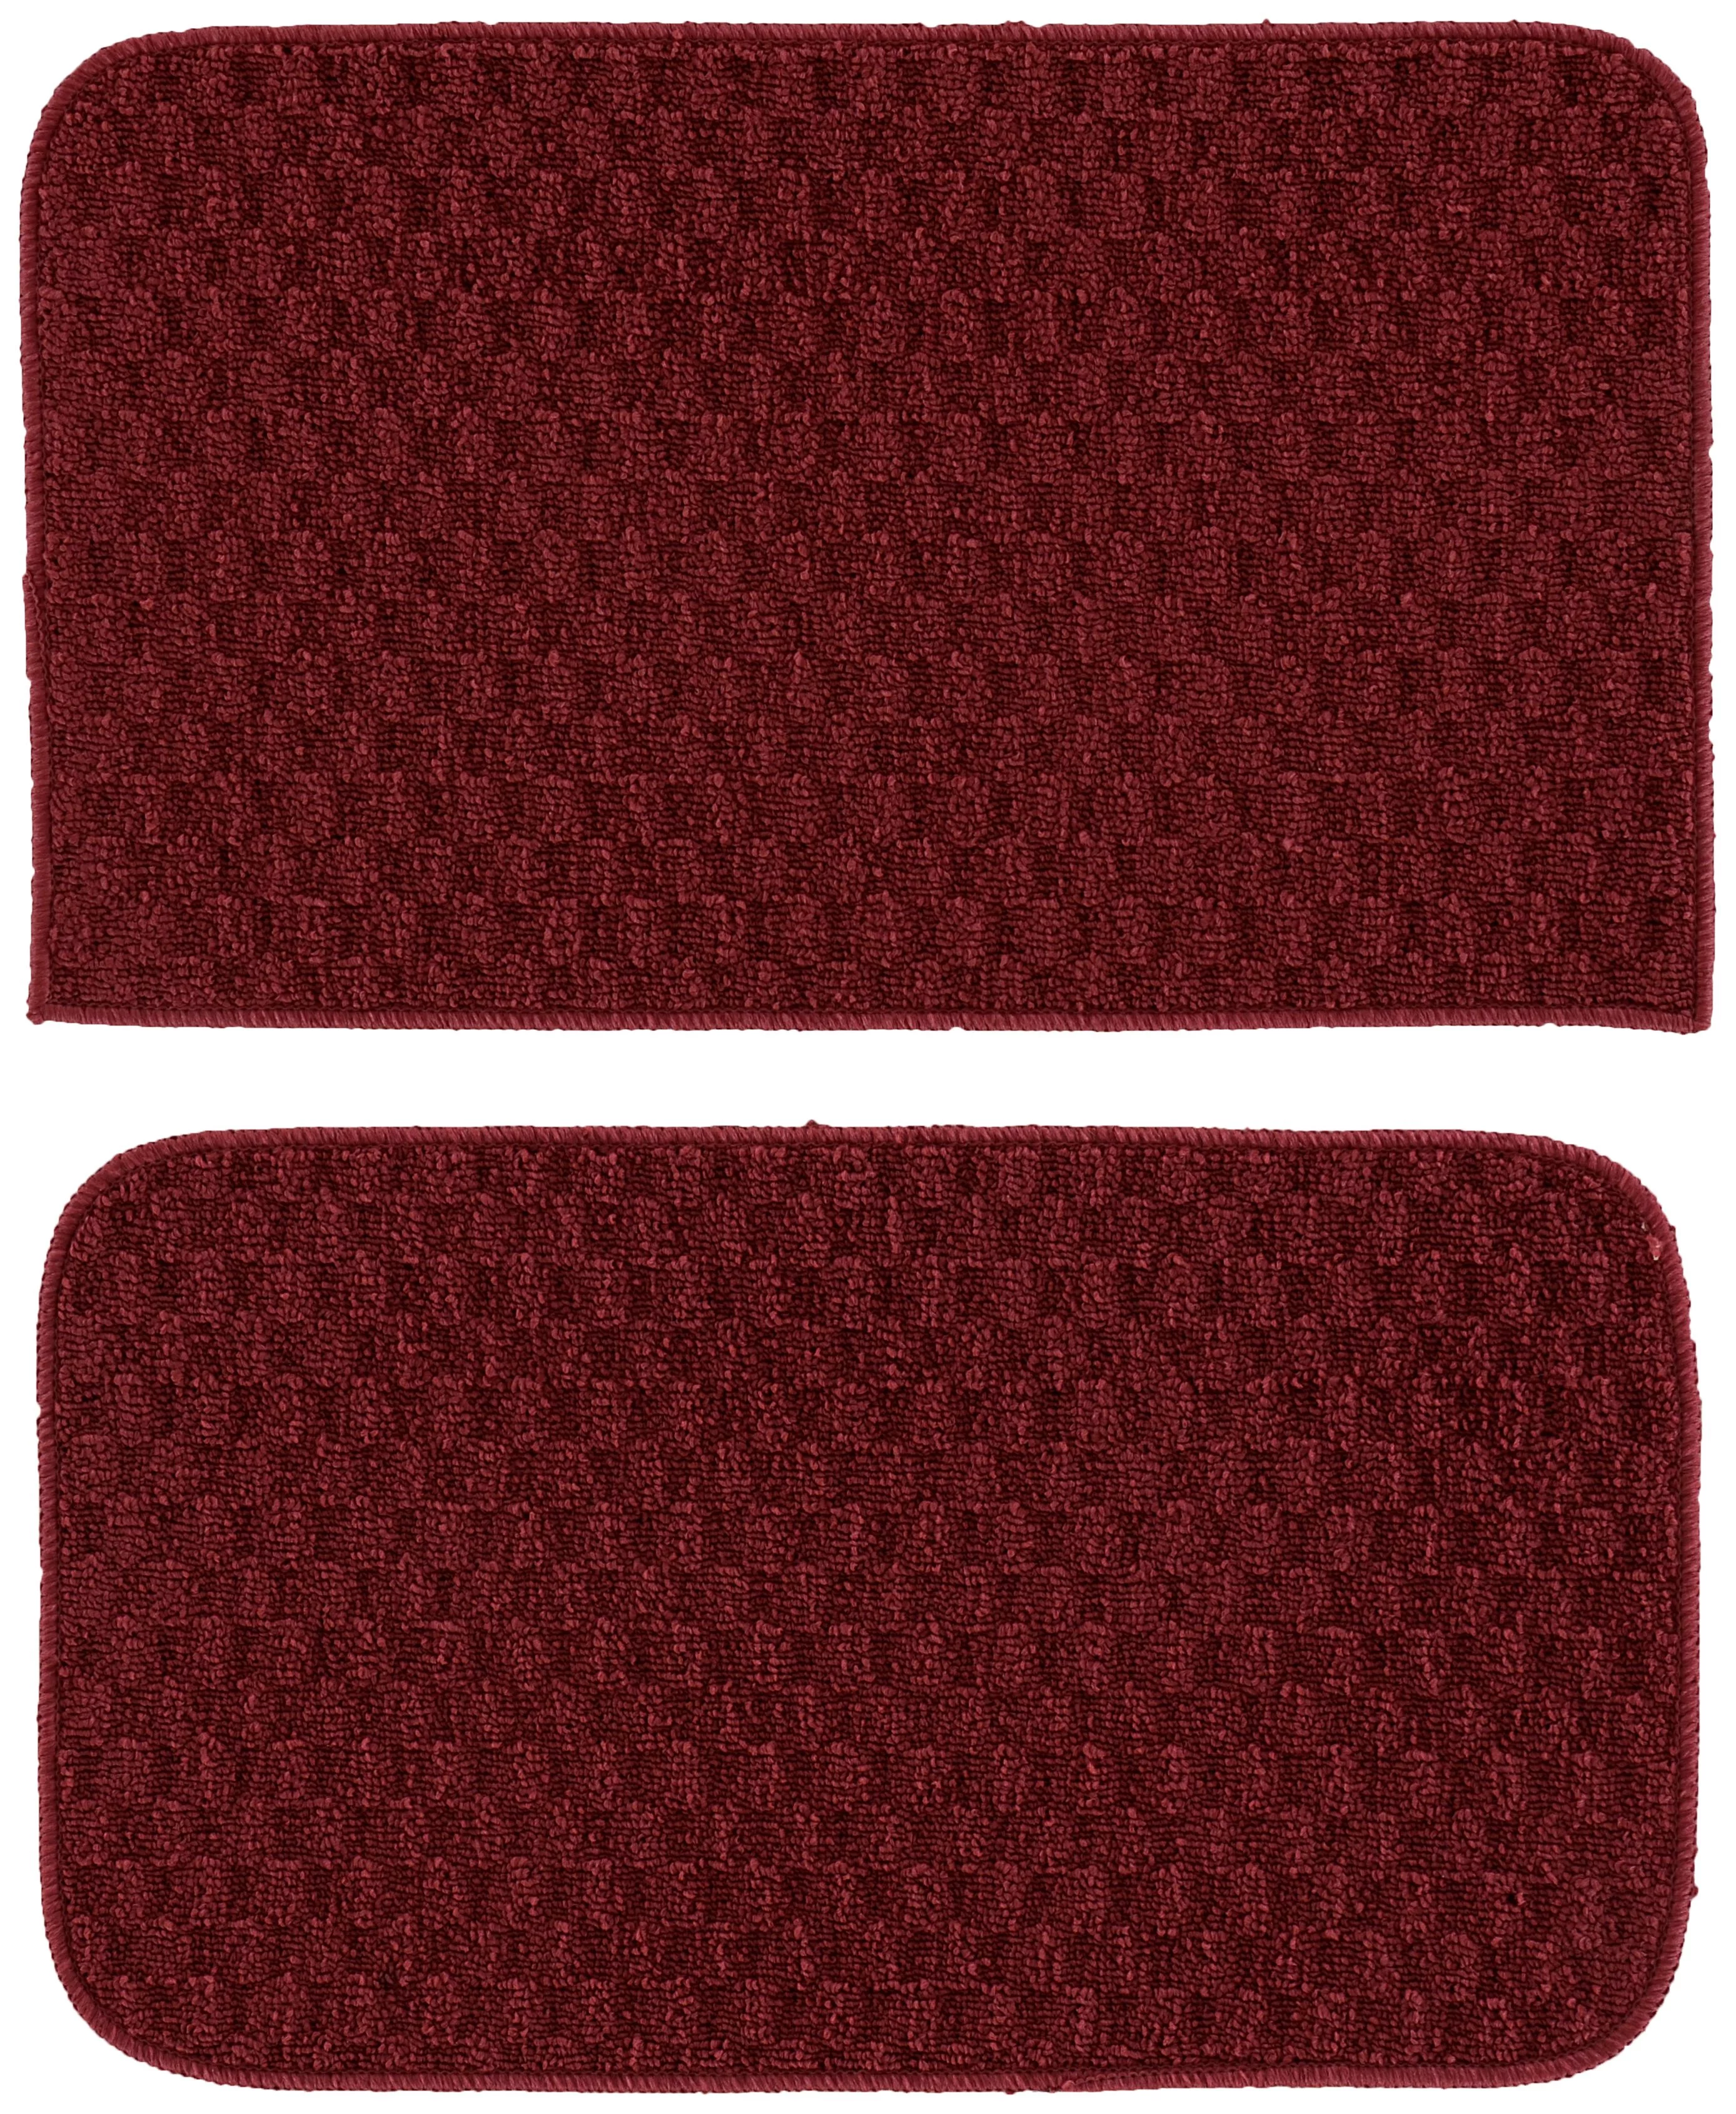 Garland Rug Town Square 2pc Kitchen Rug Set 18 in. x28 in. Slice & 18 in. x28 in. Mat Chili Red